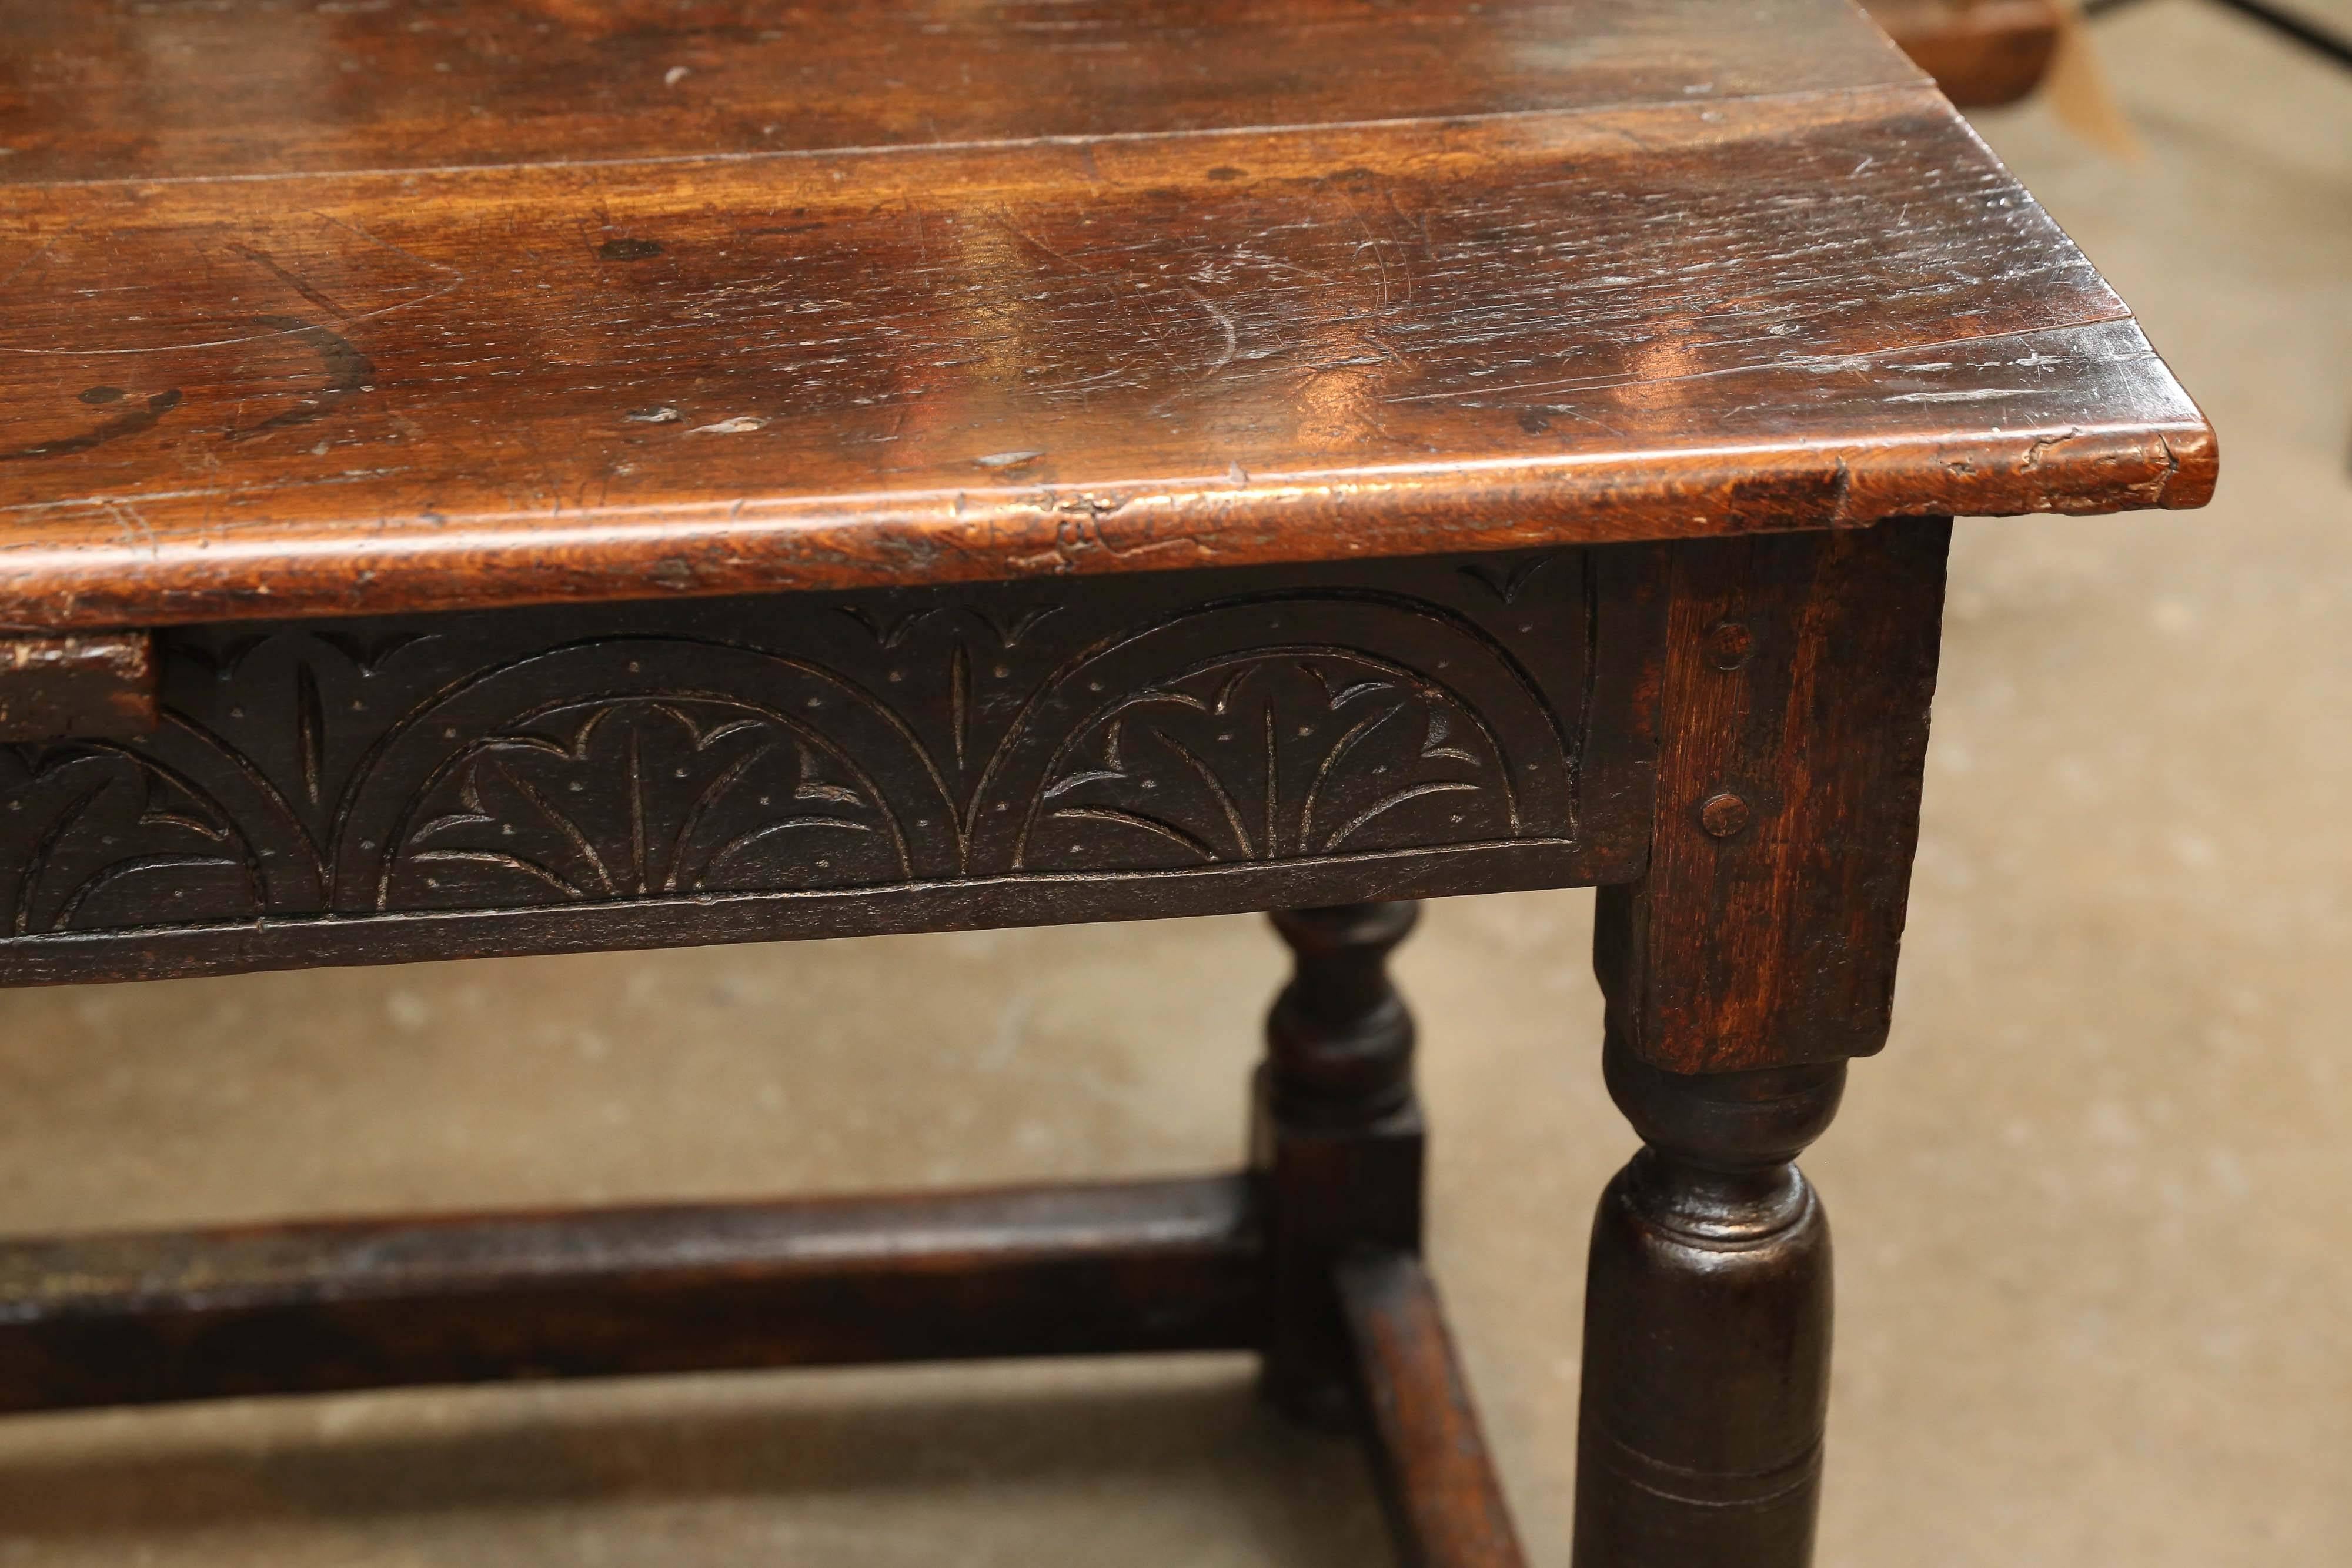 Antique 17th century Irish oak table with carving on the apron on three side. Turned baluster legs with beautifully worn stretchers, all original to the piece, between the legs. Legs then end on flat bun feet. Beautiful patina and worn edges on all